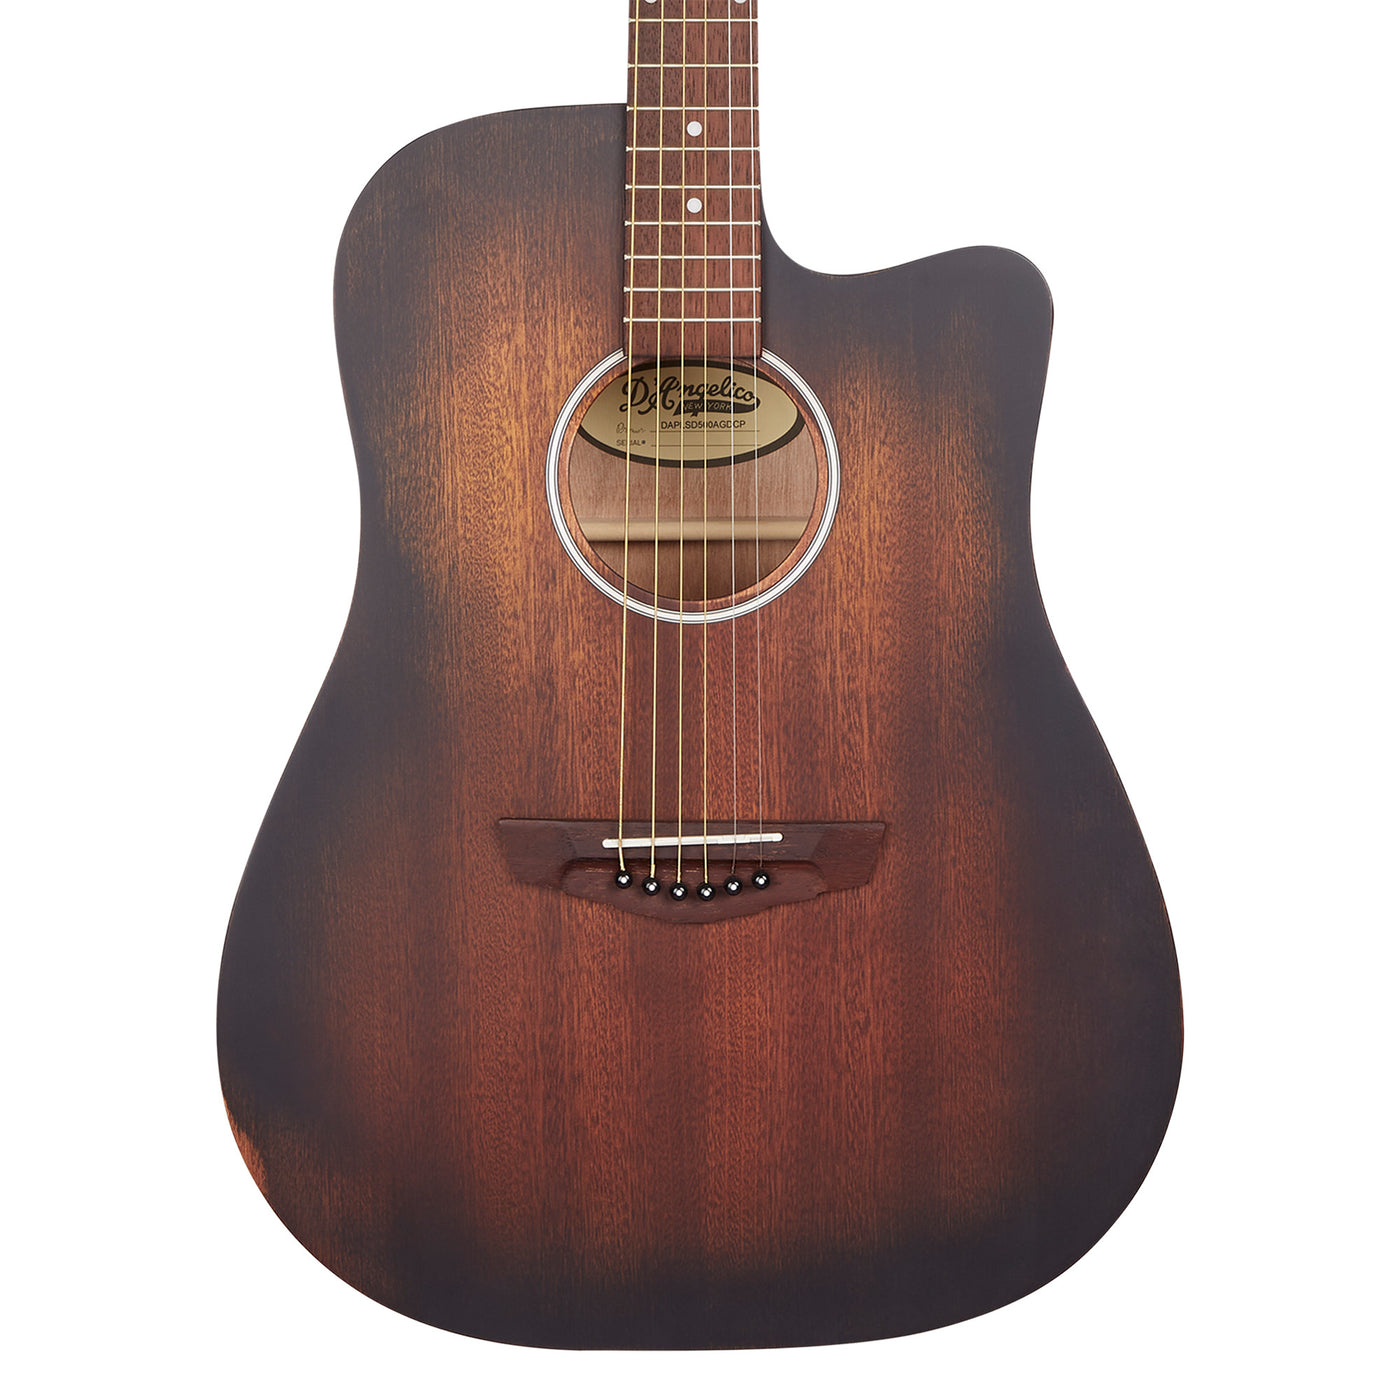 D'Angelico Premier Bowery LS Dreadnought CE, Aged Mahogany (DAPLSD500AGDCP)